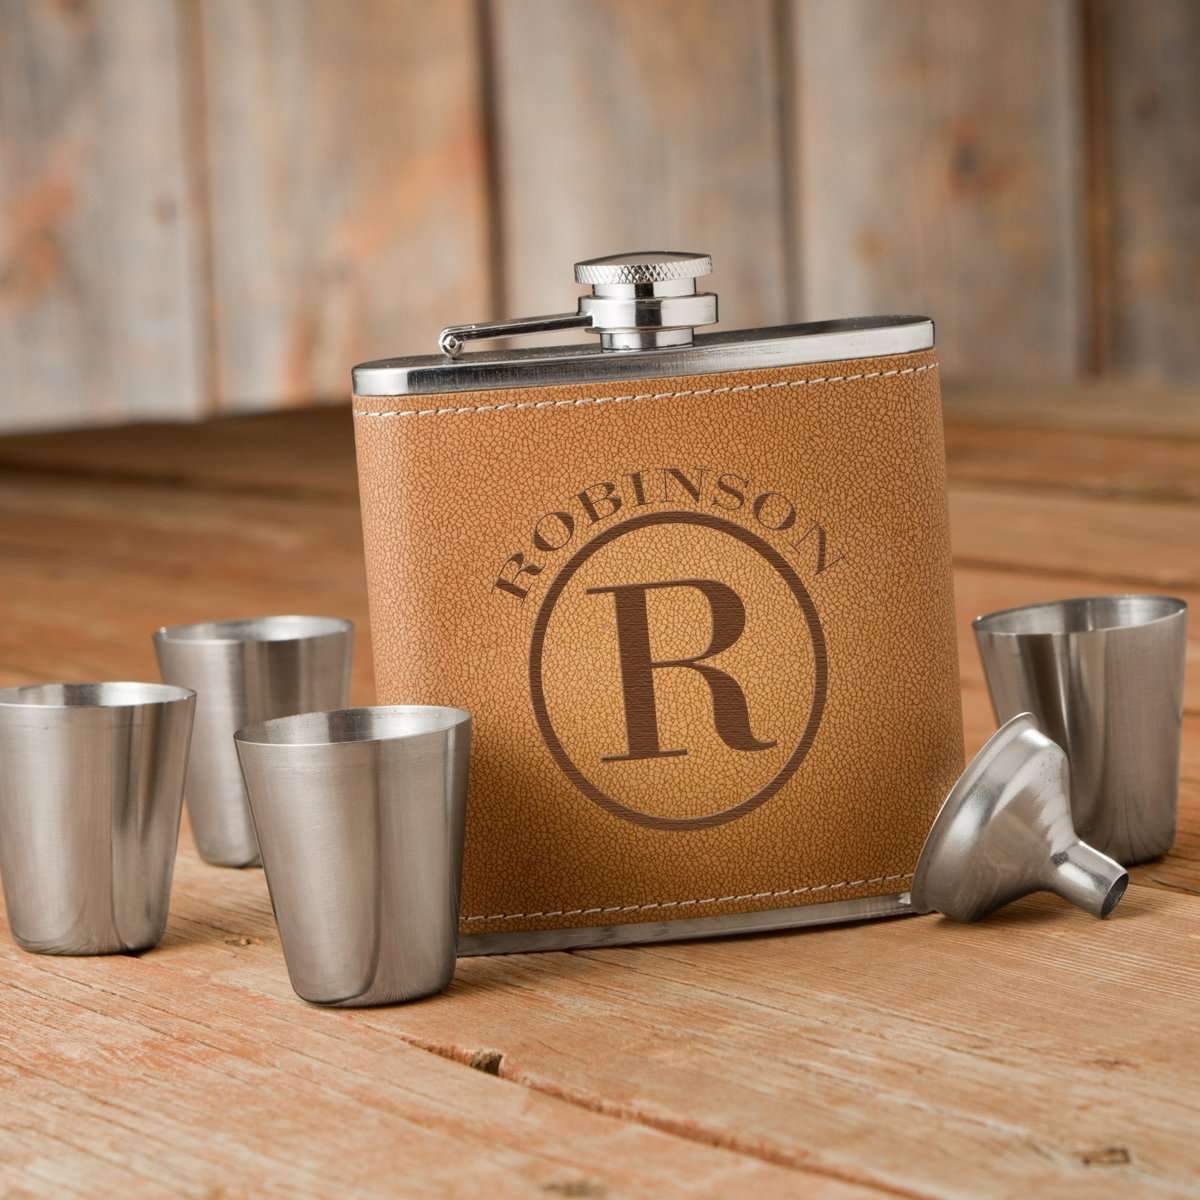 Engraved Durango Leather Hide Stitch Flask Gift Box w/ Shot Glasses - Way Up Gifts